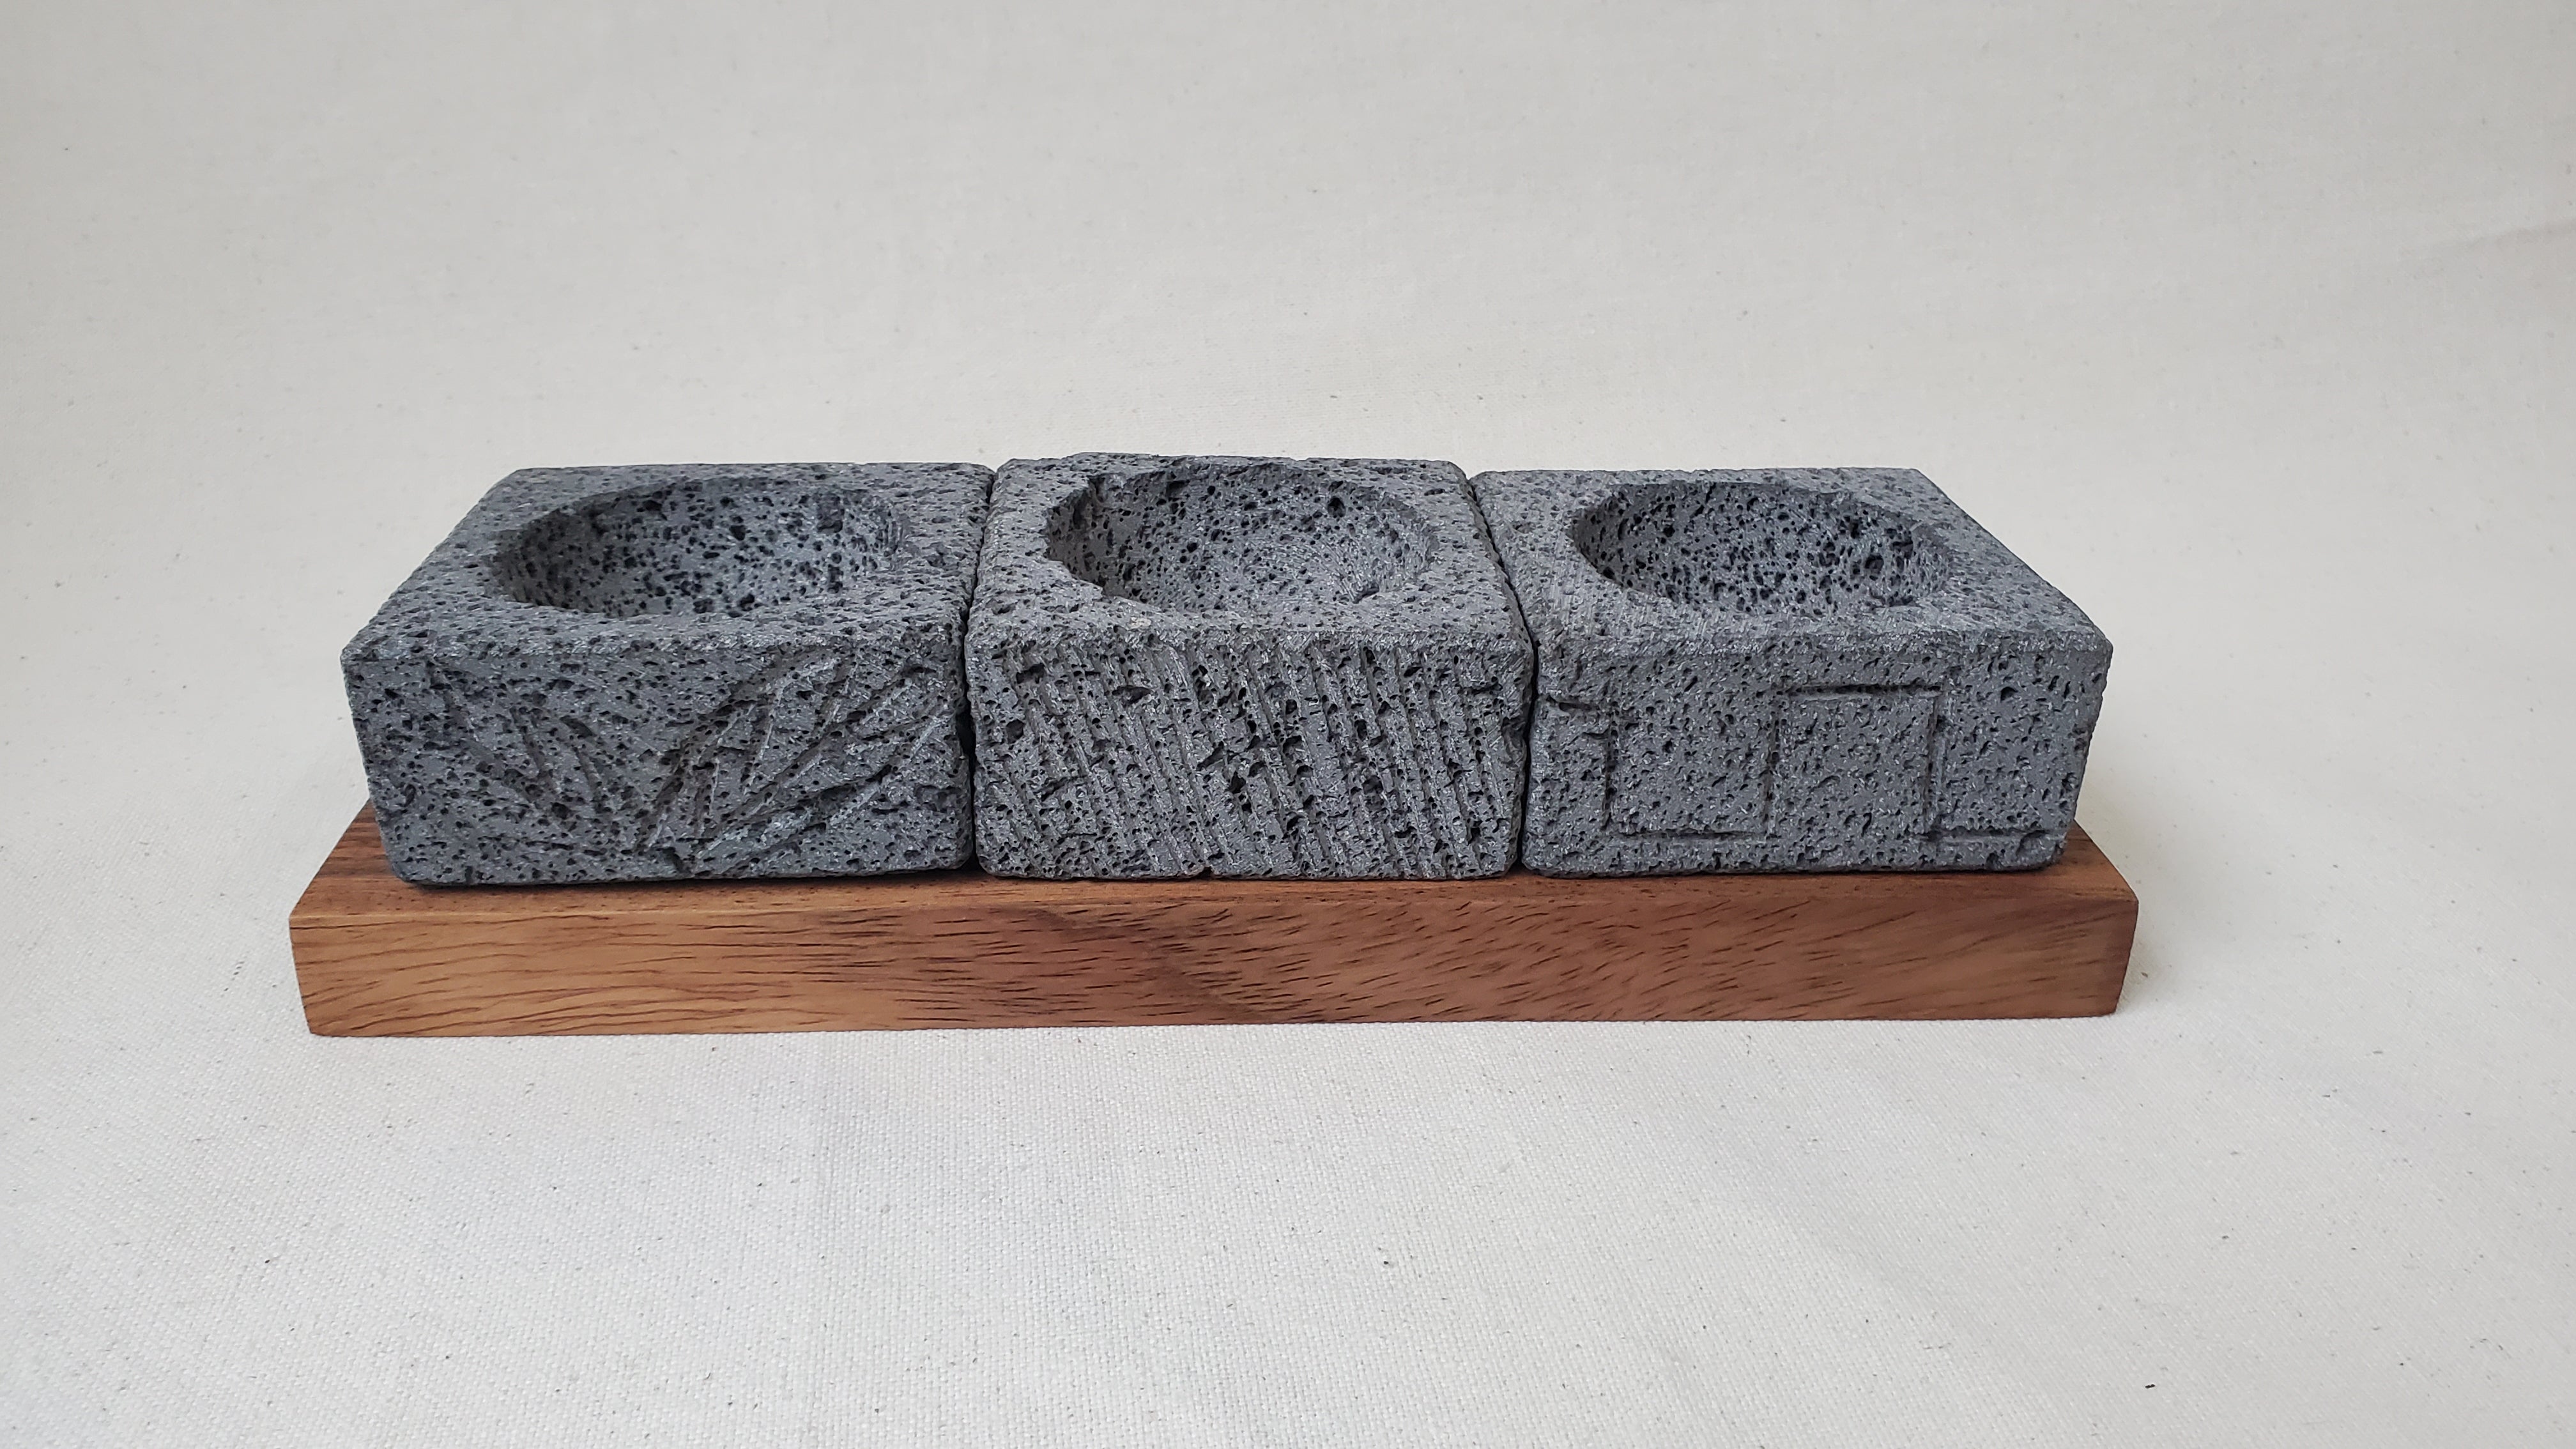 Three Square Serving Bowls on a Rectangle Wooden Base. Made of Basalt Lava Rock Volcanic Stone. Handmade in Mexico using traditional techniques. We hand finish, package, and ship from the USA. Buy now at www.felipeandgrace.com.